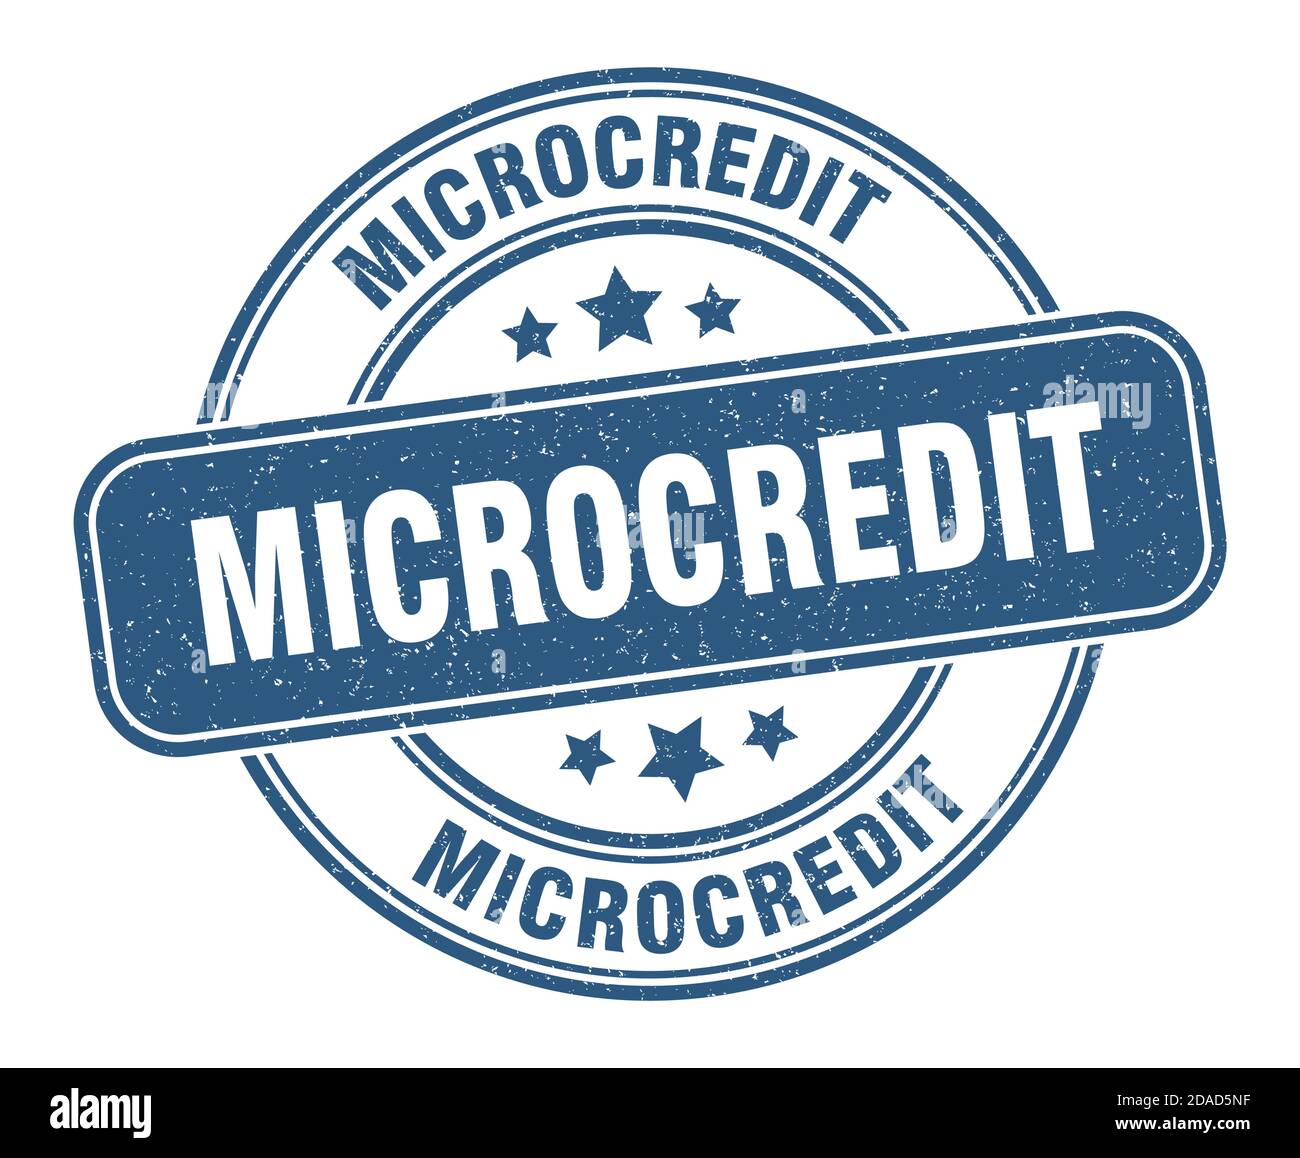 microcredit stamp. microcredit sign. round grunge label Stock Vector